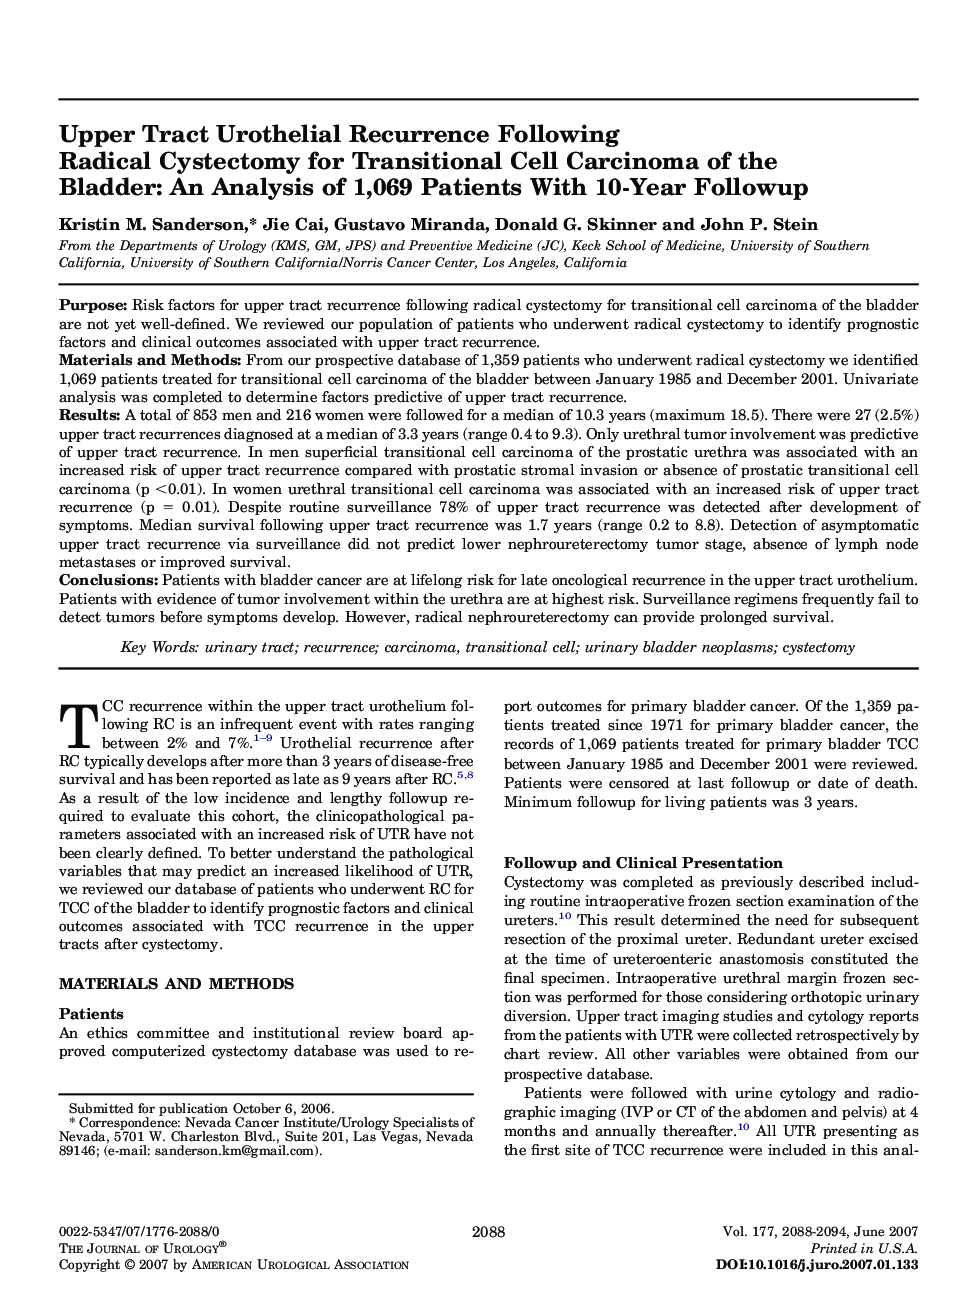 Upper Tract Urothelial Recurrence Following Radical Cystectomy for Transitional Cell Carcinoma of the Bladder: An Analysis of 1,069 Patients With 10-Year Followup